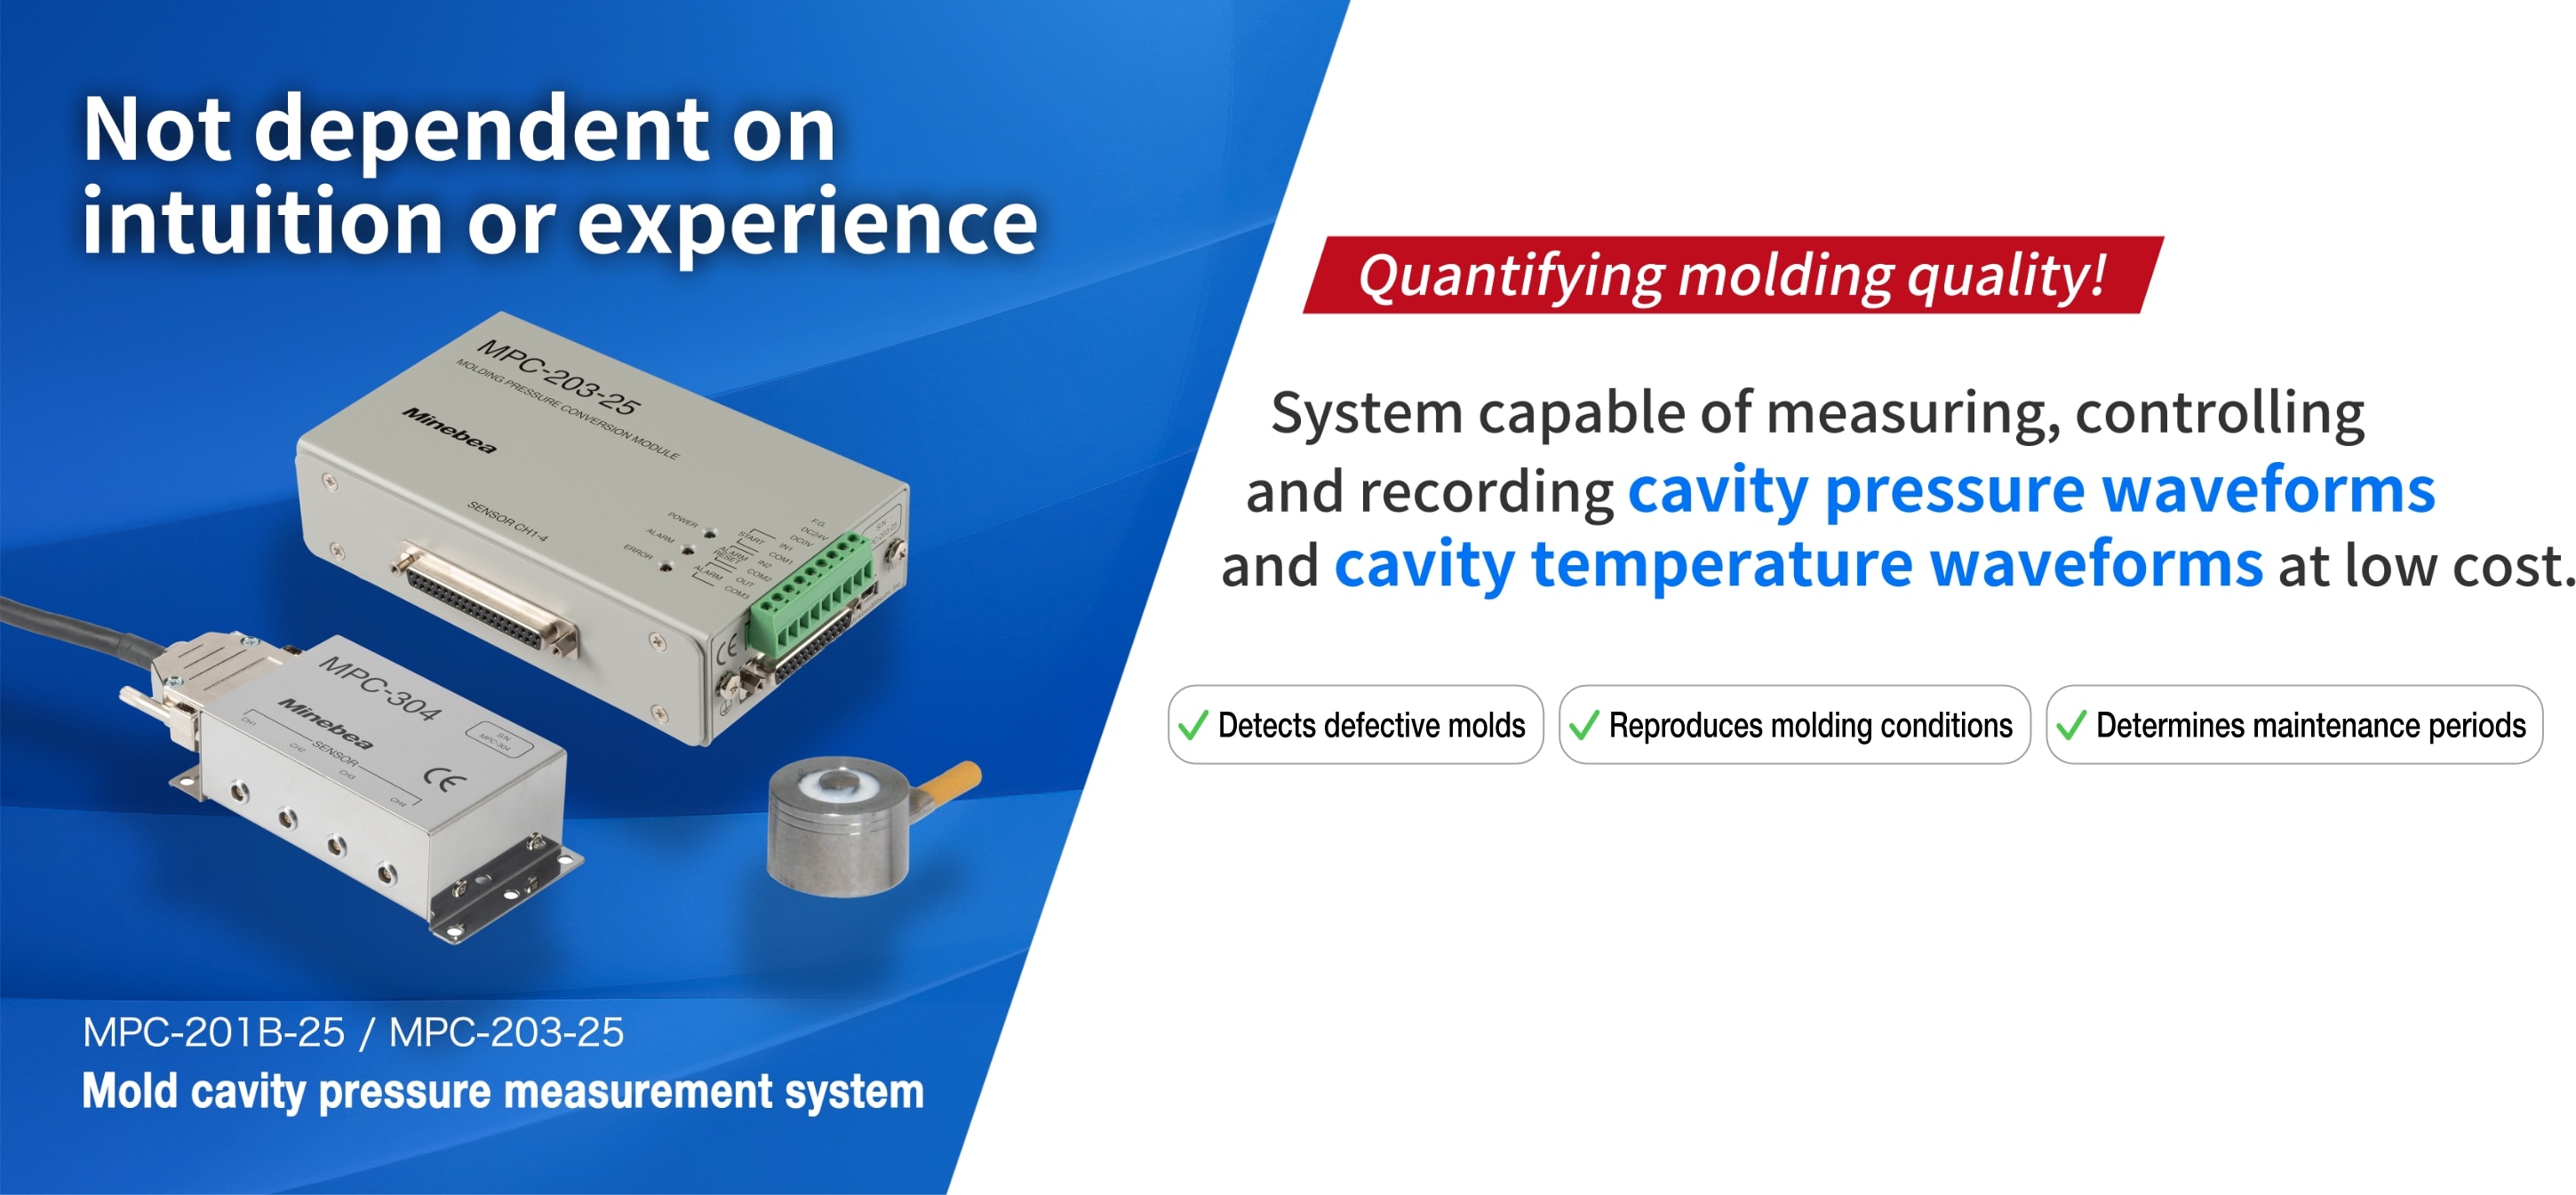 System capable of measuring, controlling and recording cavity pressure waveforms and cavity temperature waveforms at low cost.
Reproduce molding conditions
Determine maintenance timing
Detect molding defects